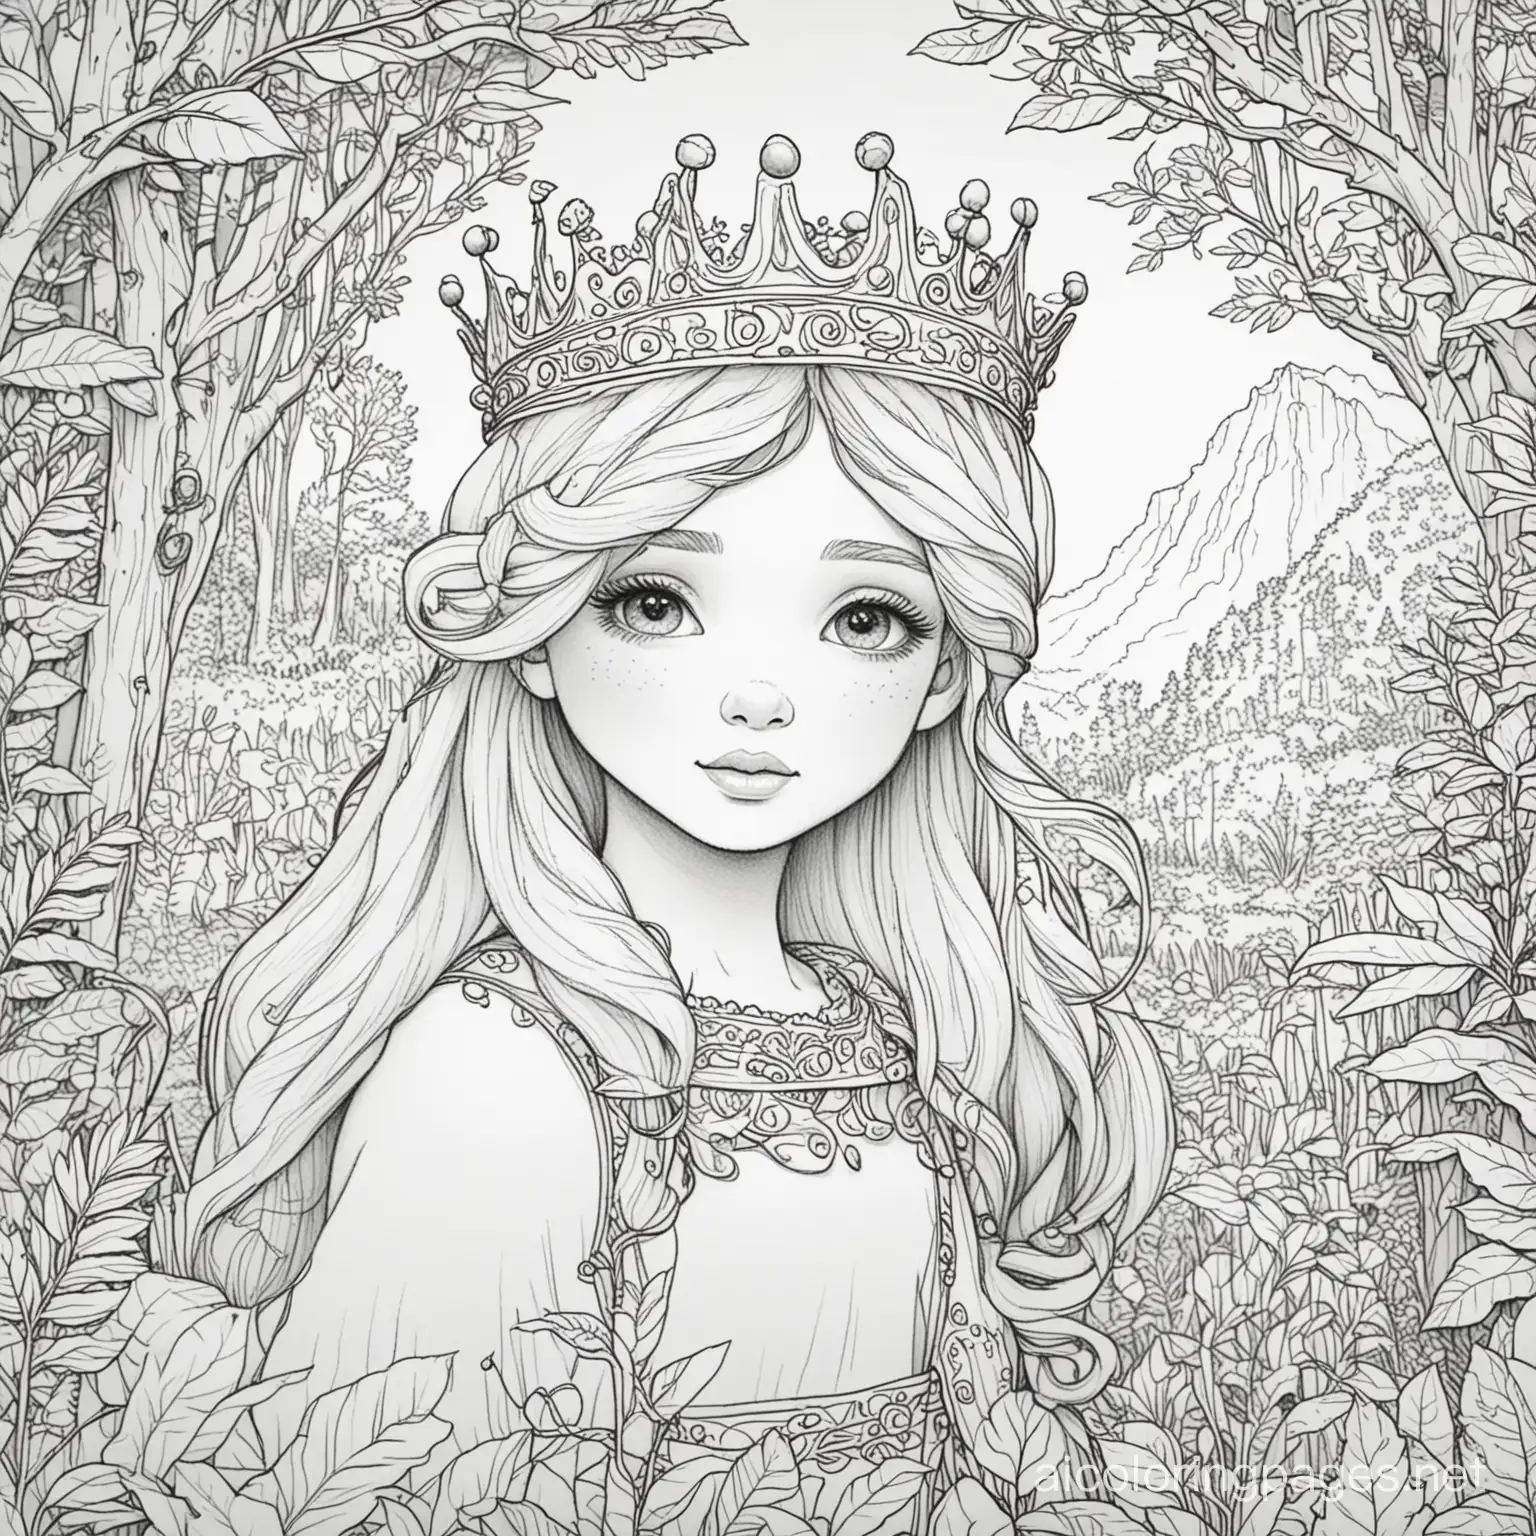 a nature-loving princess, wearing a crown, who explores the wilderness, bold lines, , Coloring Page, black and white, line art, white background, Simplicity, Ample White Space. The background of the coloring page is plain white to make it easy for young children to color within the lines. The outlines of all the subjects are easy to distinguish, making it simple for kids to color without too much difficulty